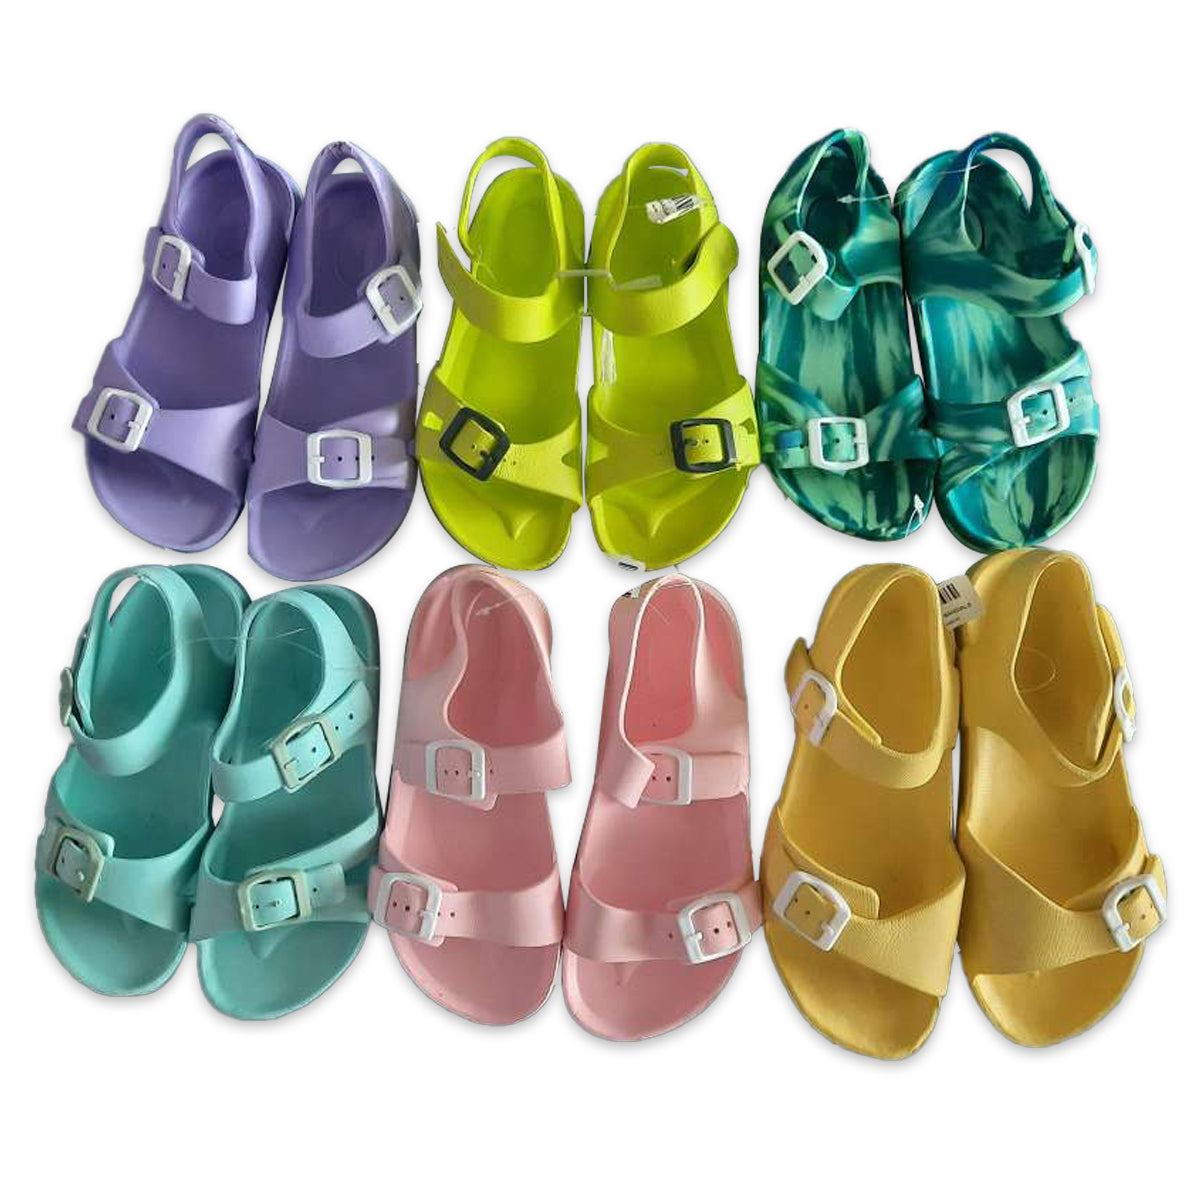 Kids Jandals [Assorted Sizes]